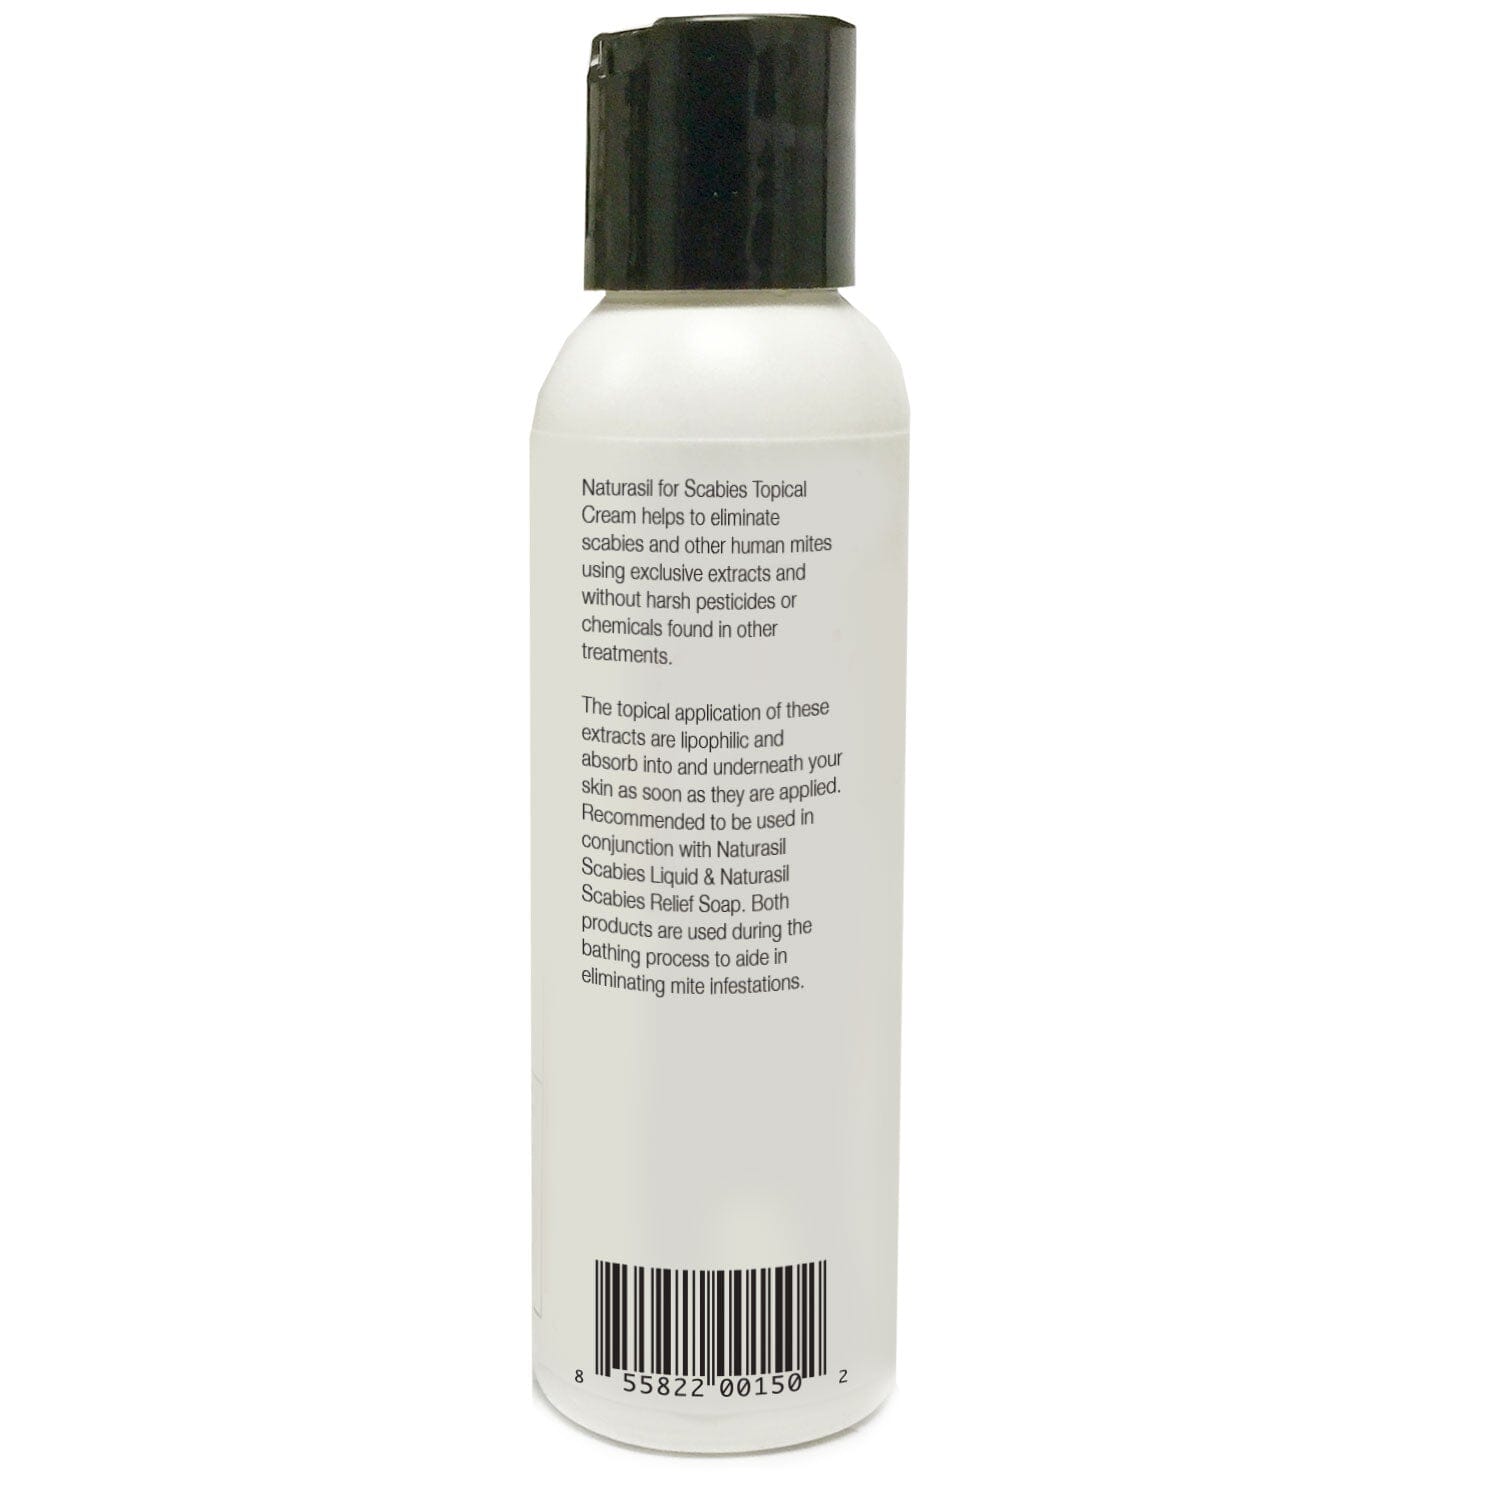 Scabies Treatment Lotion | Buy One, Get One 25% Off | 2 - 4 oz Bottles - Naturasil